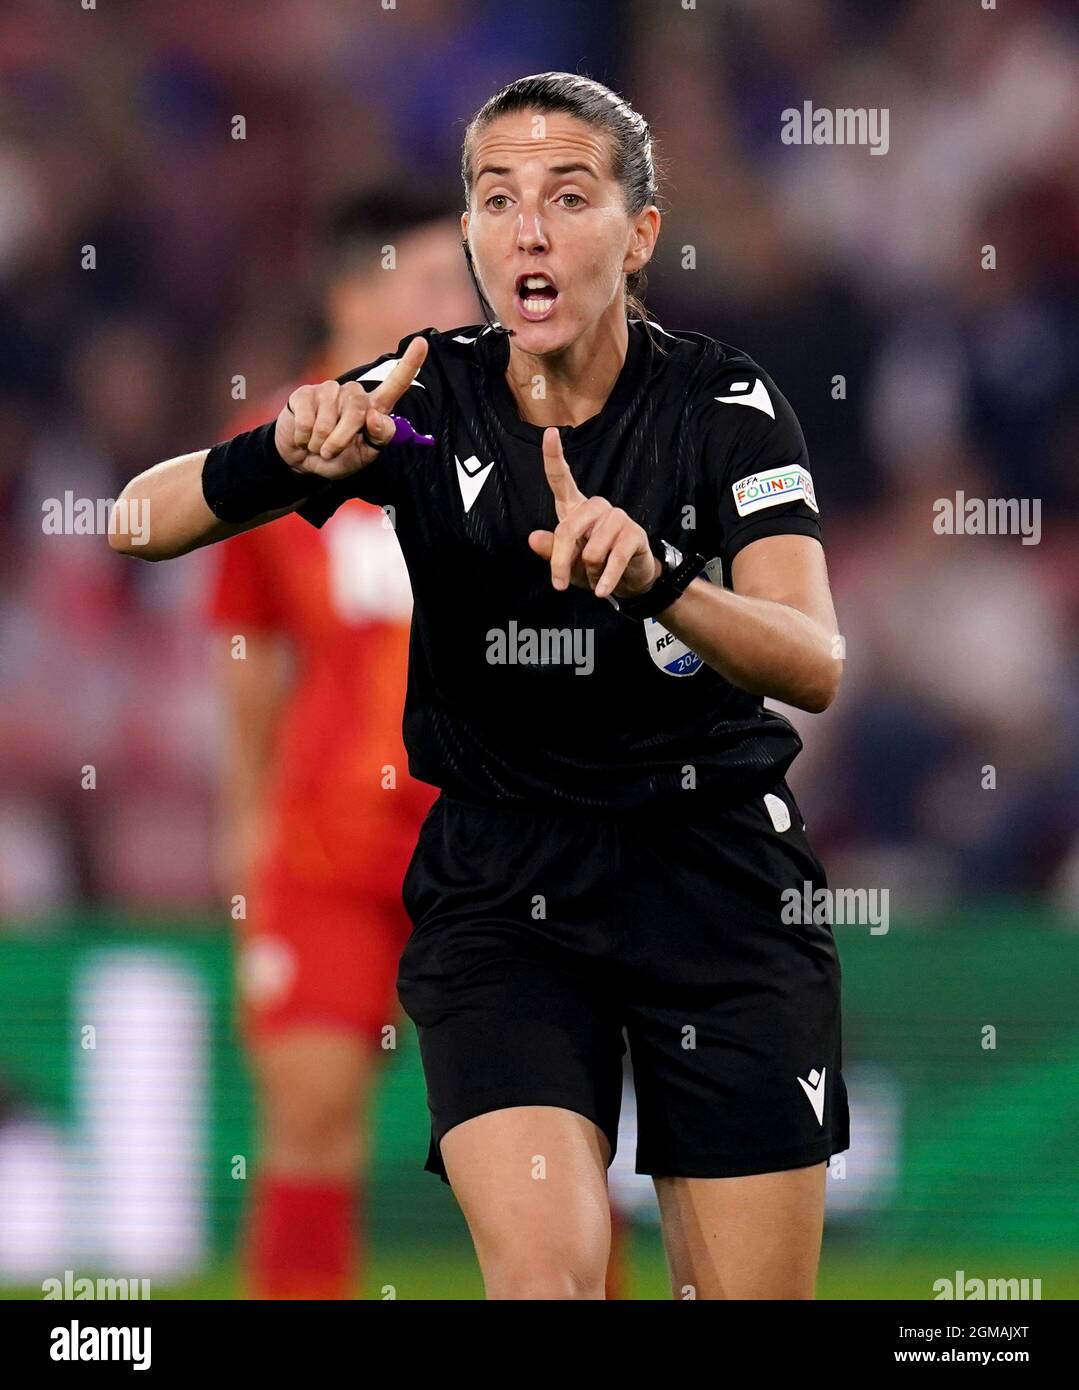 Referee María Dolores Martínez Madrona during the UEFA Qualifier match at St Mary's, Southampton. Picture date: Friday September 17, 2021. See PA story SOCCER England Women. Photo credit should read: John Walton/PA Wire. RESTRICTIONS: Use subject to restrictions. Editorial use only, no commercial use without prior consent from rights holder. Stock Photo